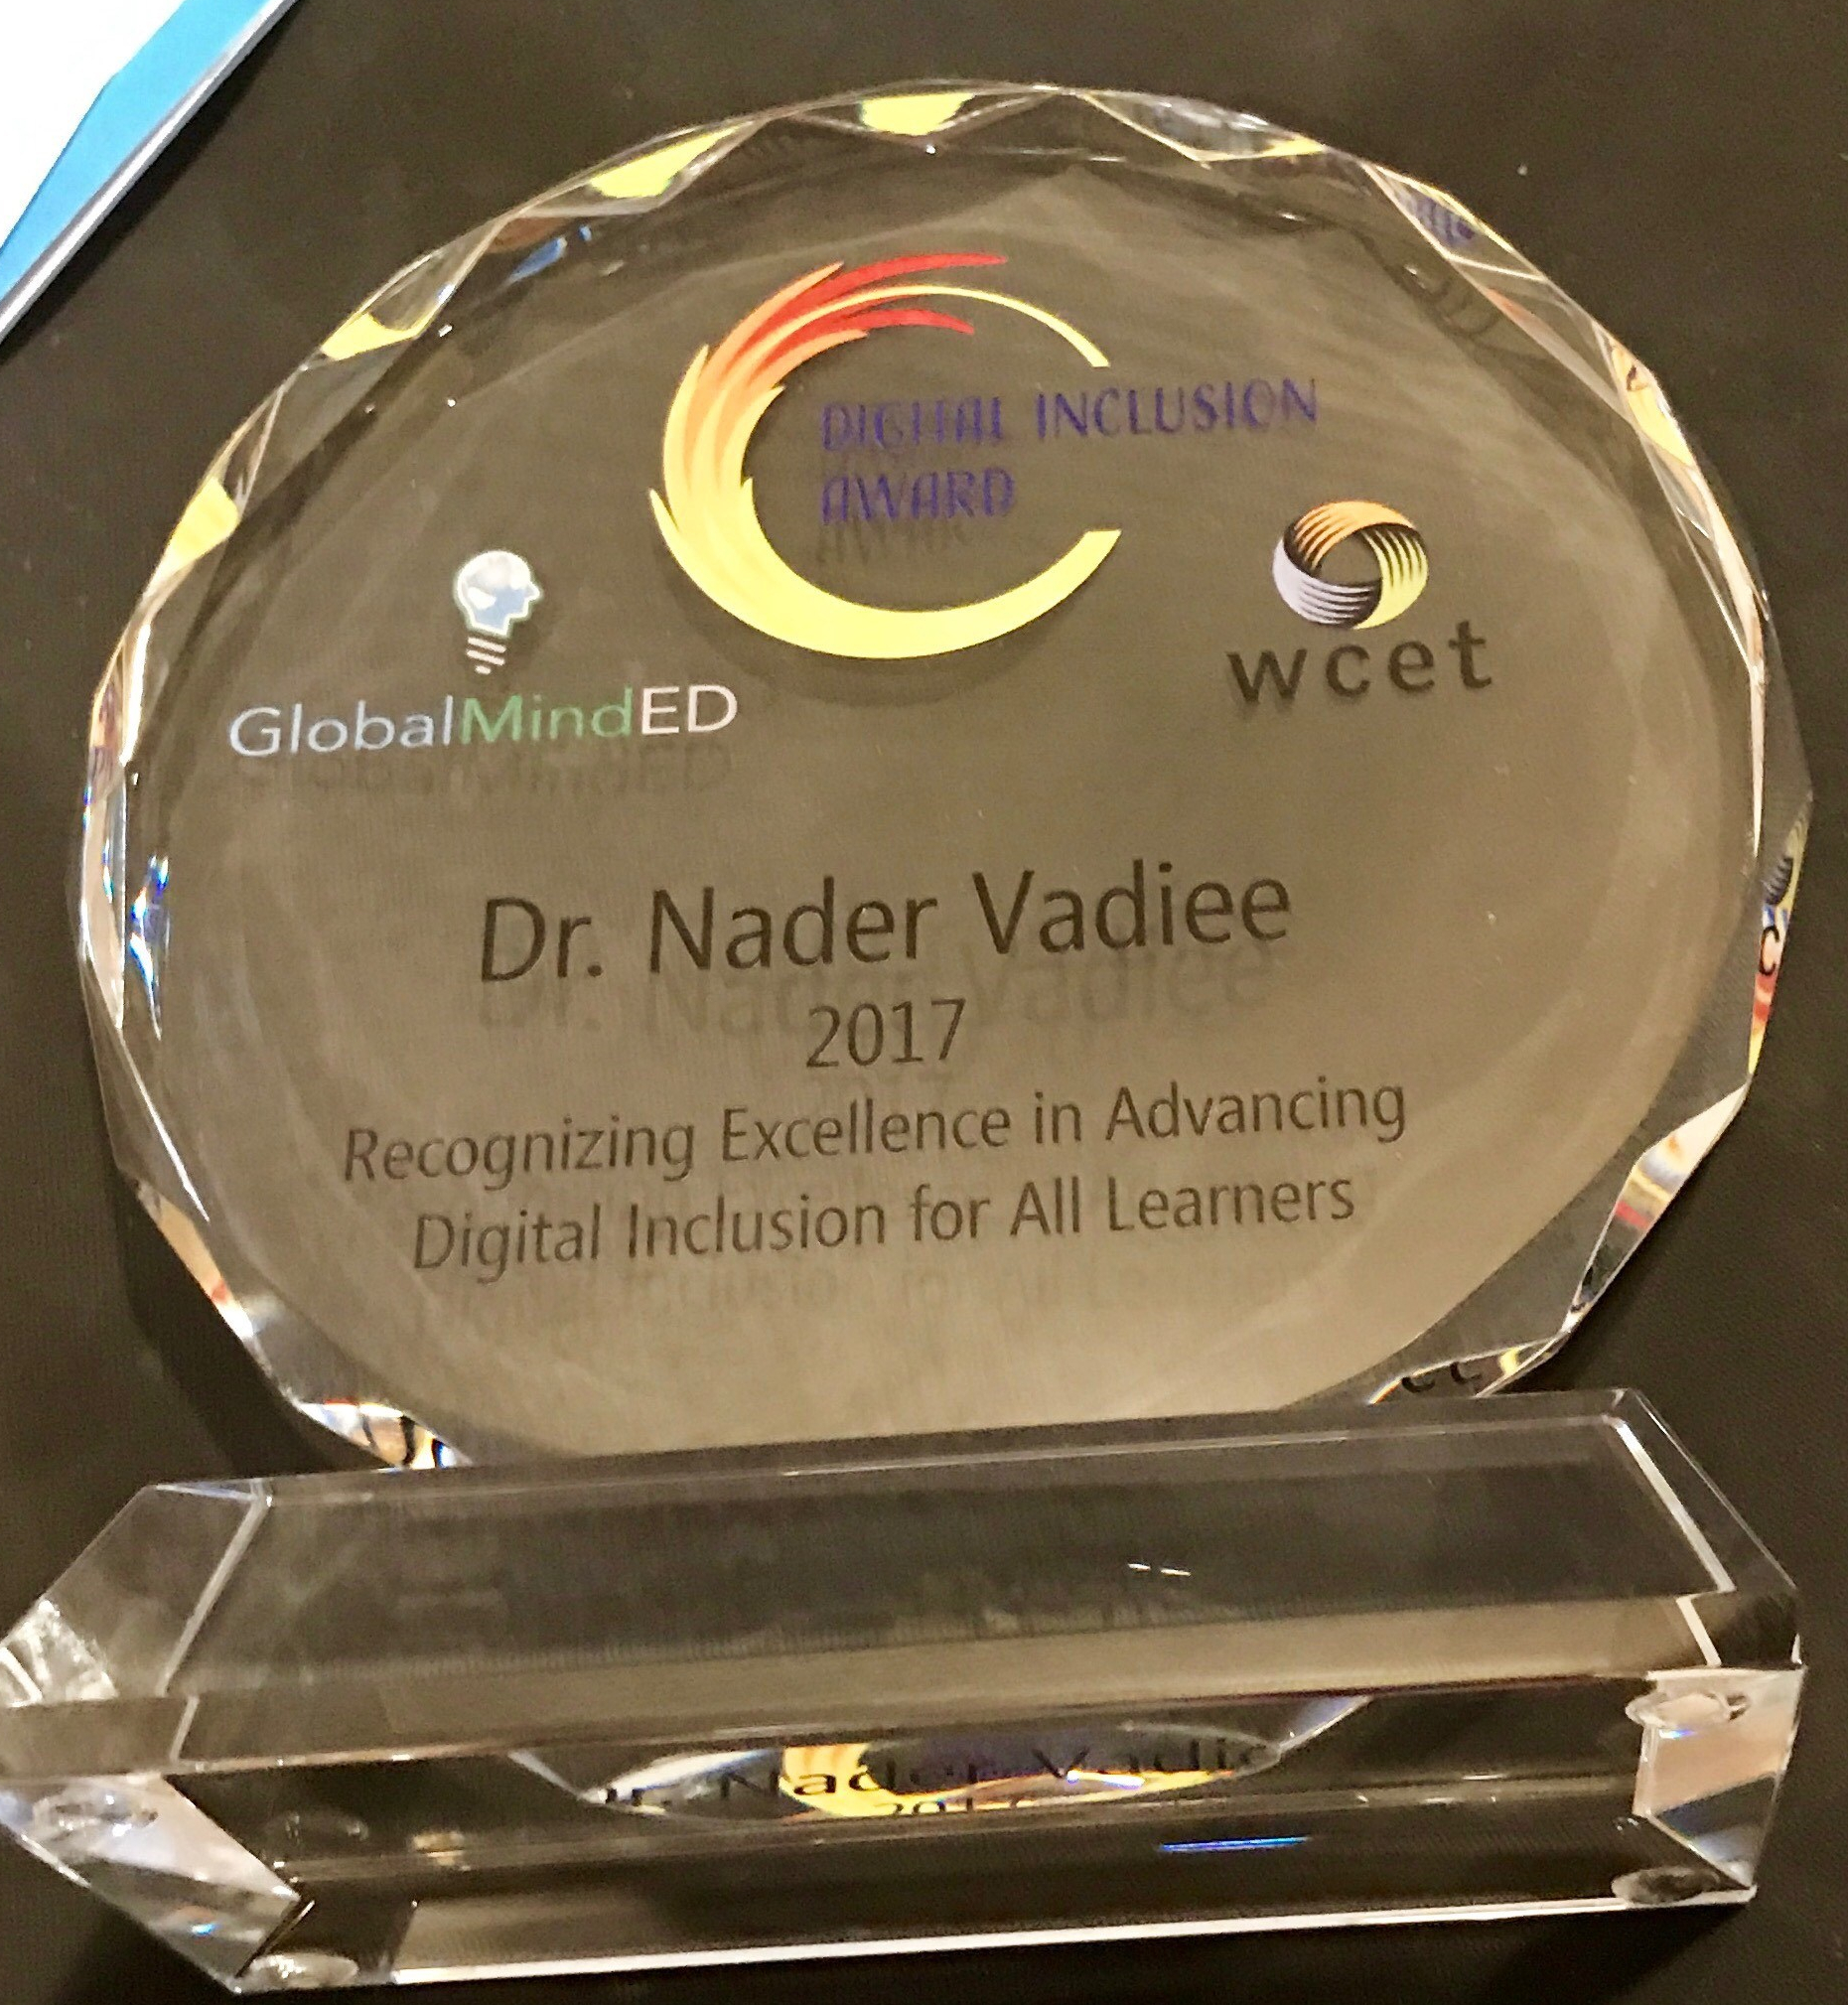 Glass plaque for the 2017 award winner Dr. Nader Vadiee. Plaque reads "recognizing excellence in advancing digital inclusion for all learners."